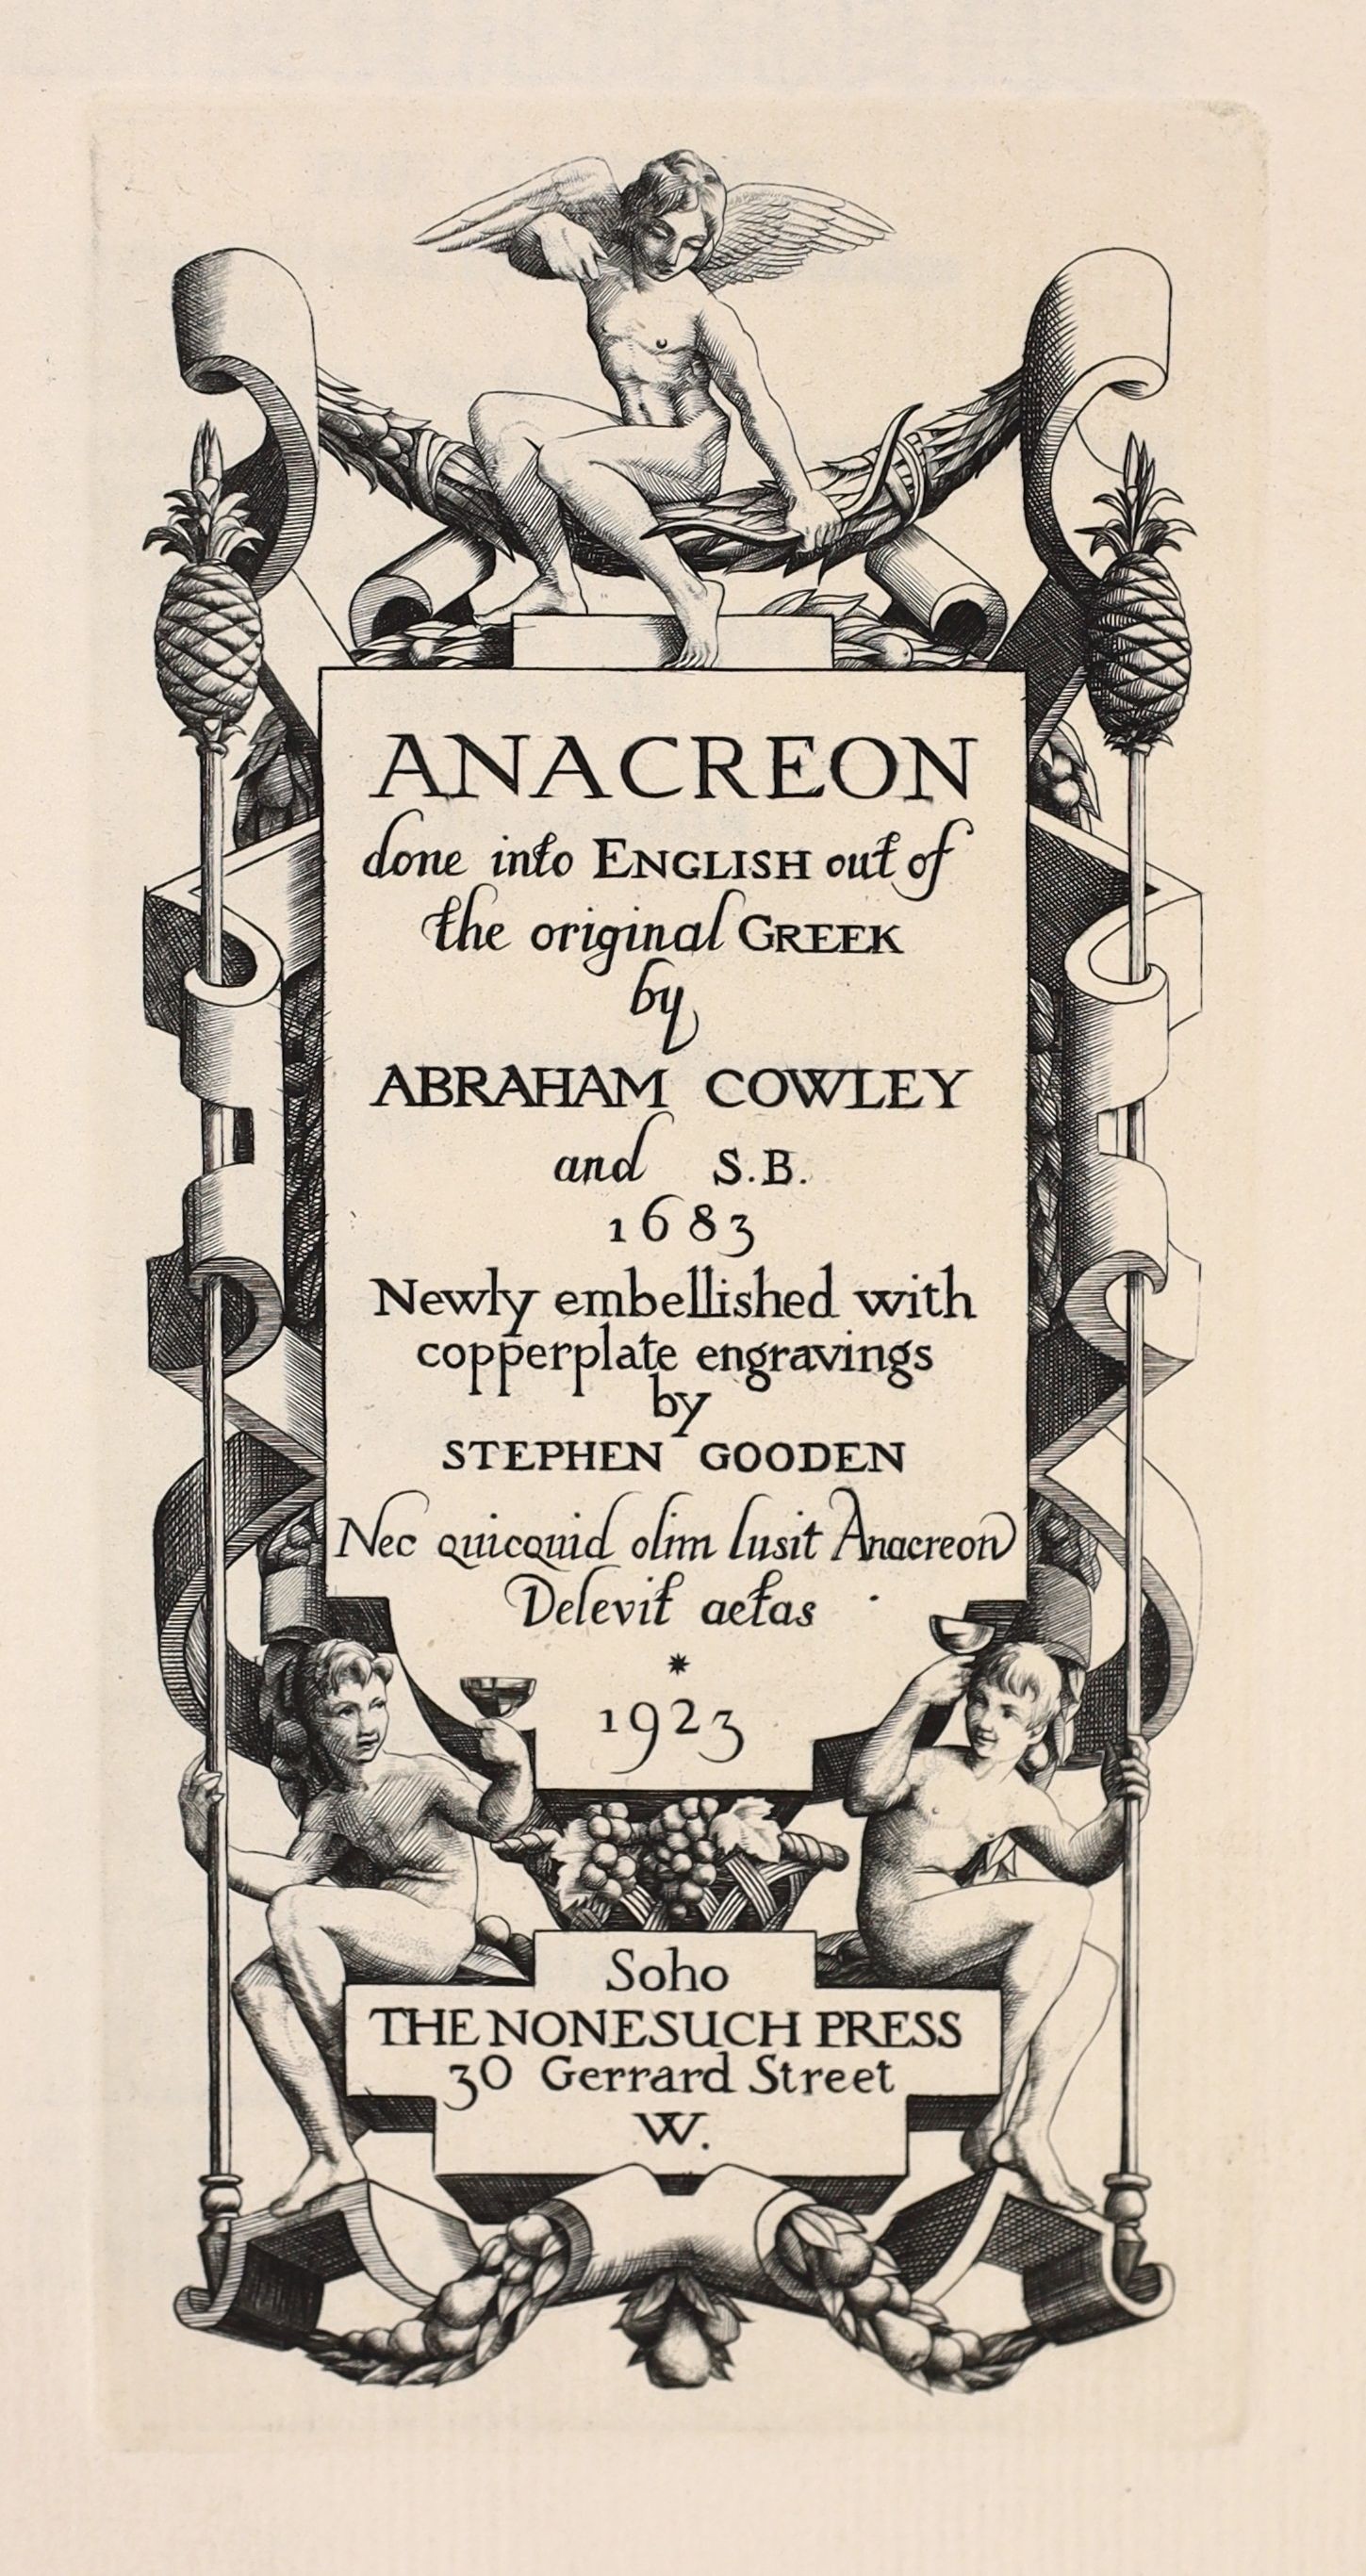 Anacreon - Anacreon done into English, one of 725, translated by Abraham Cowley, 8vo, quarter vellum, with gold paper boards and 7 copperplate engravings by Stephen Gooden, Nonesuch Press, 1923 and Addington, William - C